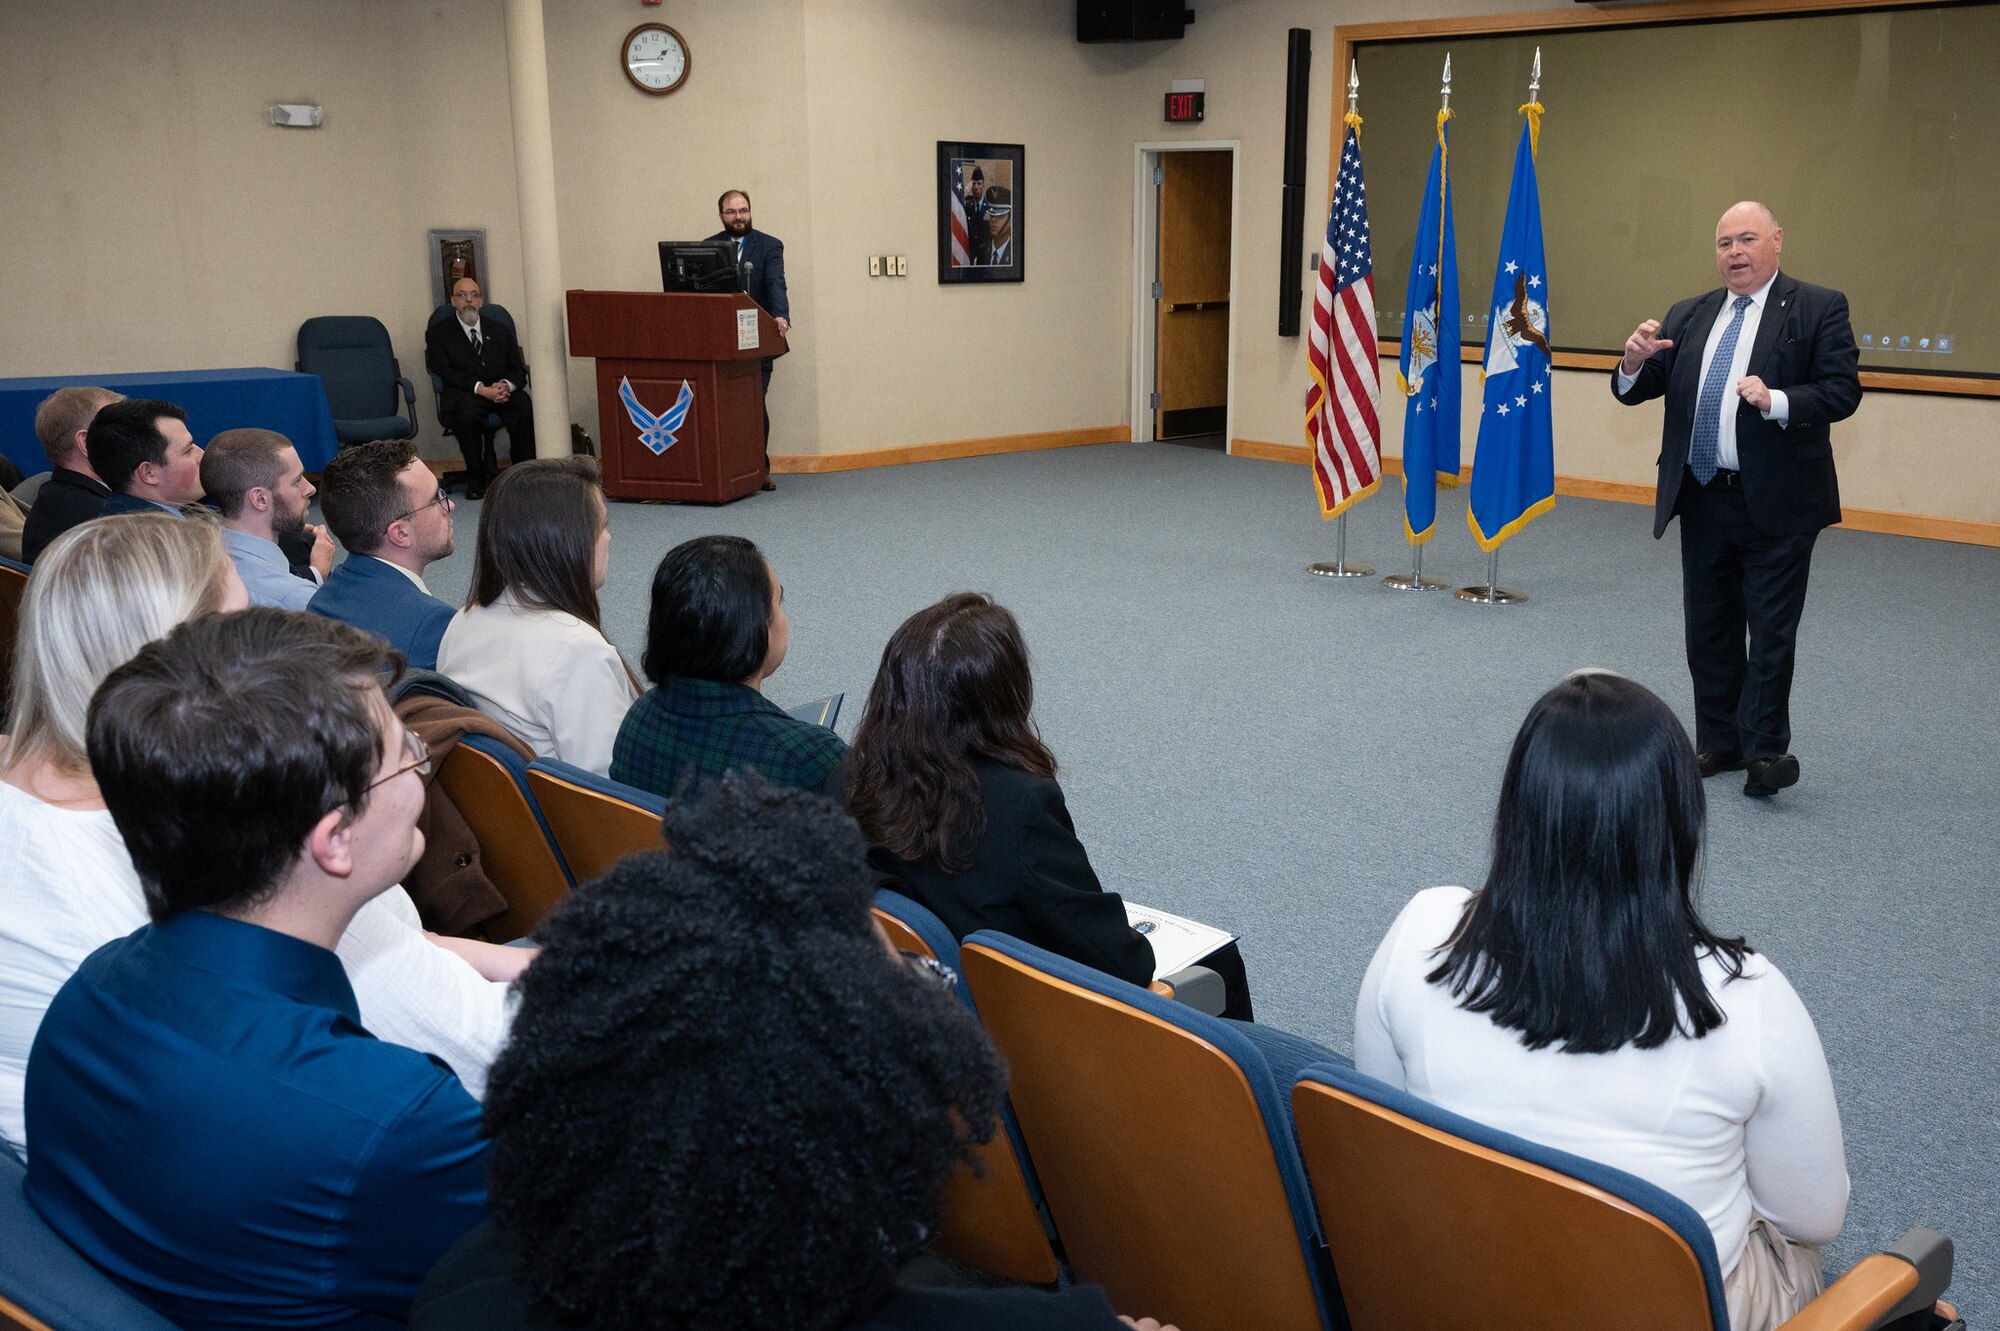 Joe Bradley, director of the Cyber Resiliency Office for Weapons Systems, and associate director of Engineering and Technical Management at Hanscom Air Force Base, Mass., speaks to new Air Force Life Cycle Management Center and Air Force Nuclear Weapons Center civilian employees during their cross-
functional graduation ceremony at Hanscom Air Force Base, Mass., Dec. 8. Many of the 58 new program managers, logisticians, contracting officers, and engineers attended the graduation ceremony either virtually or in-person. (U.S. Air Force photo by Todd Maki.)